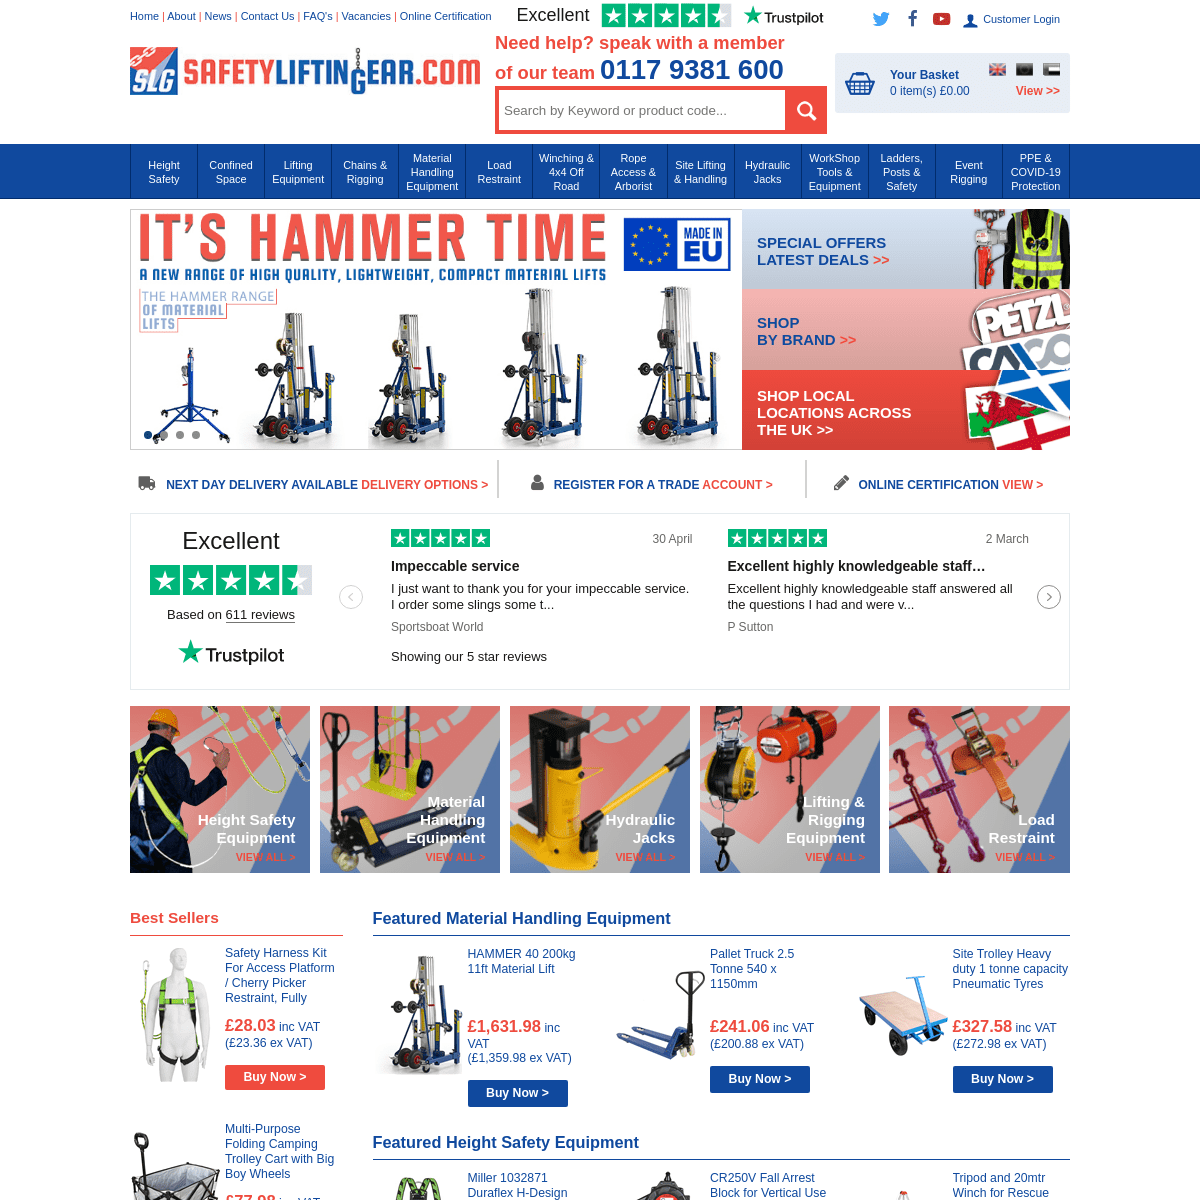 A complete backup of https://safetyliftingear.com